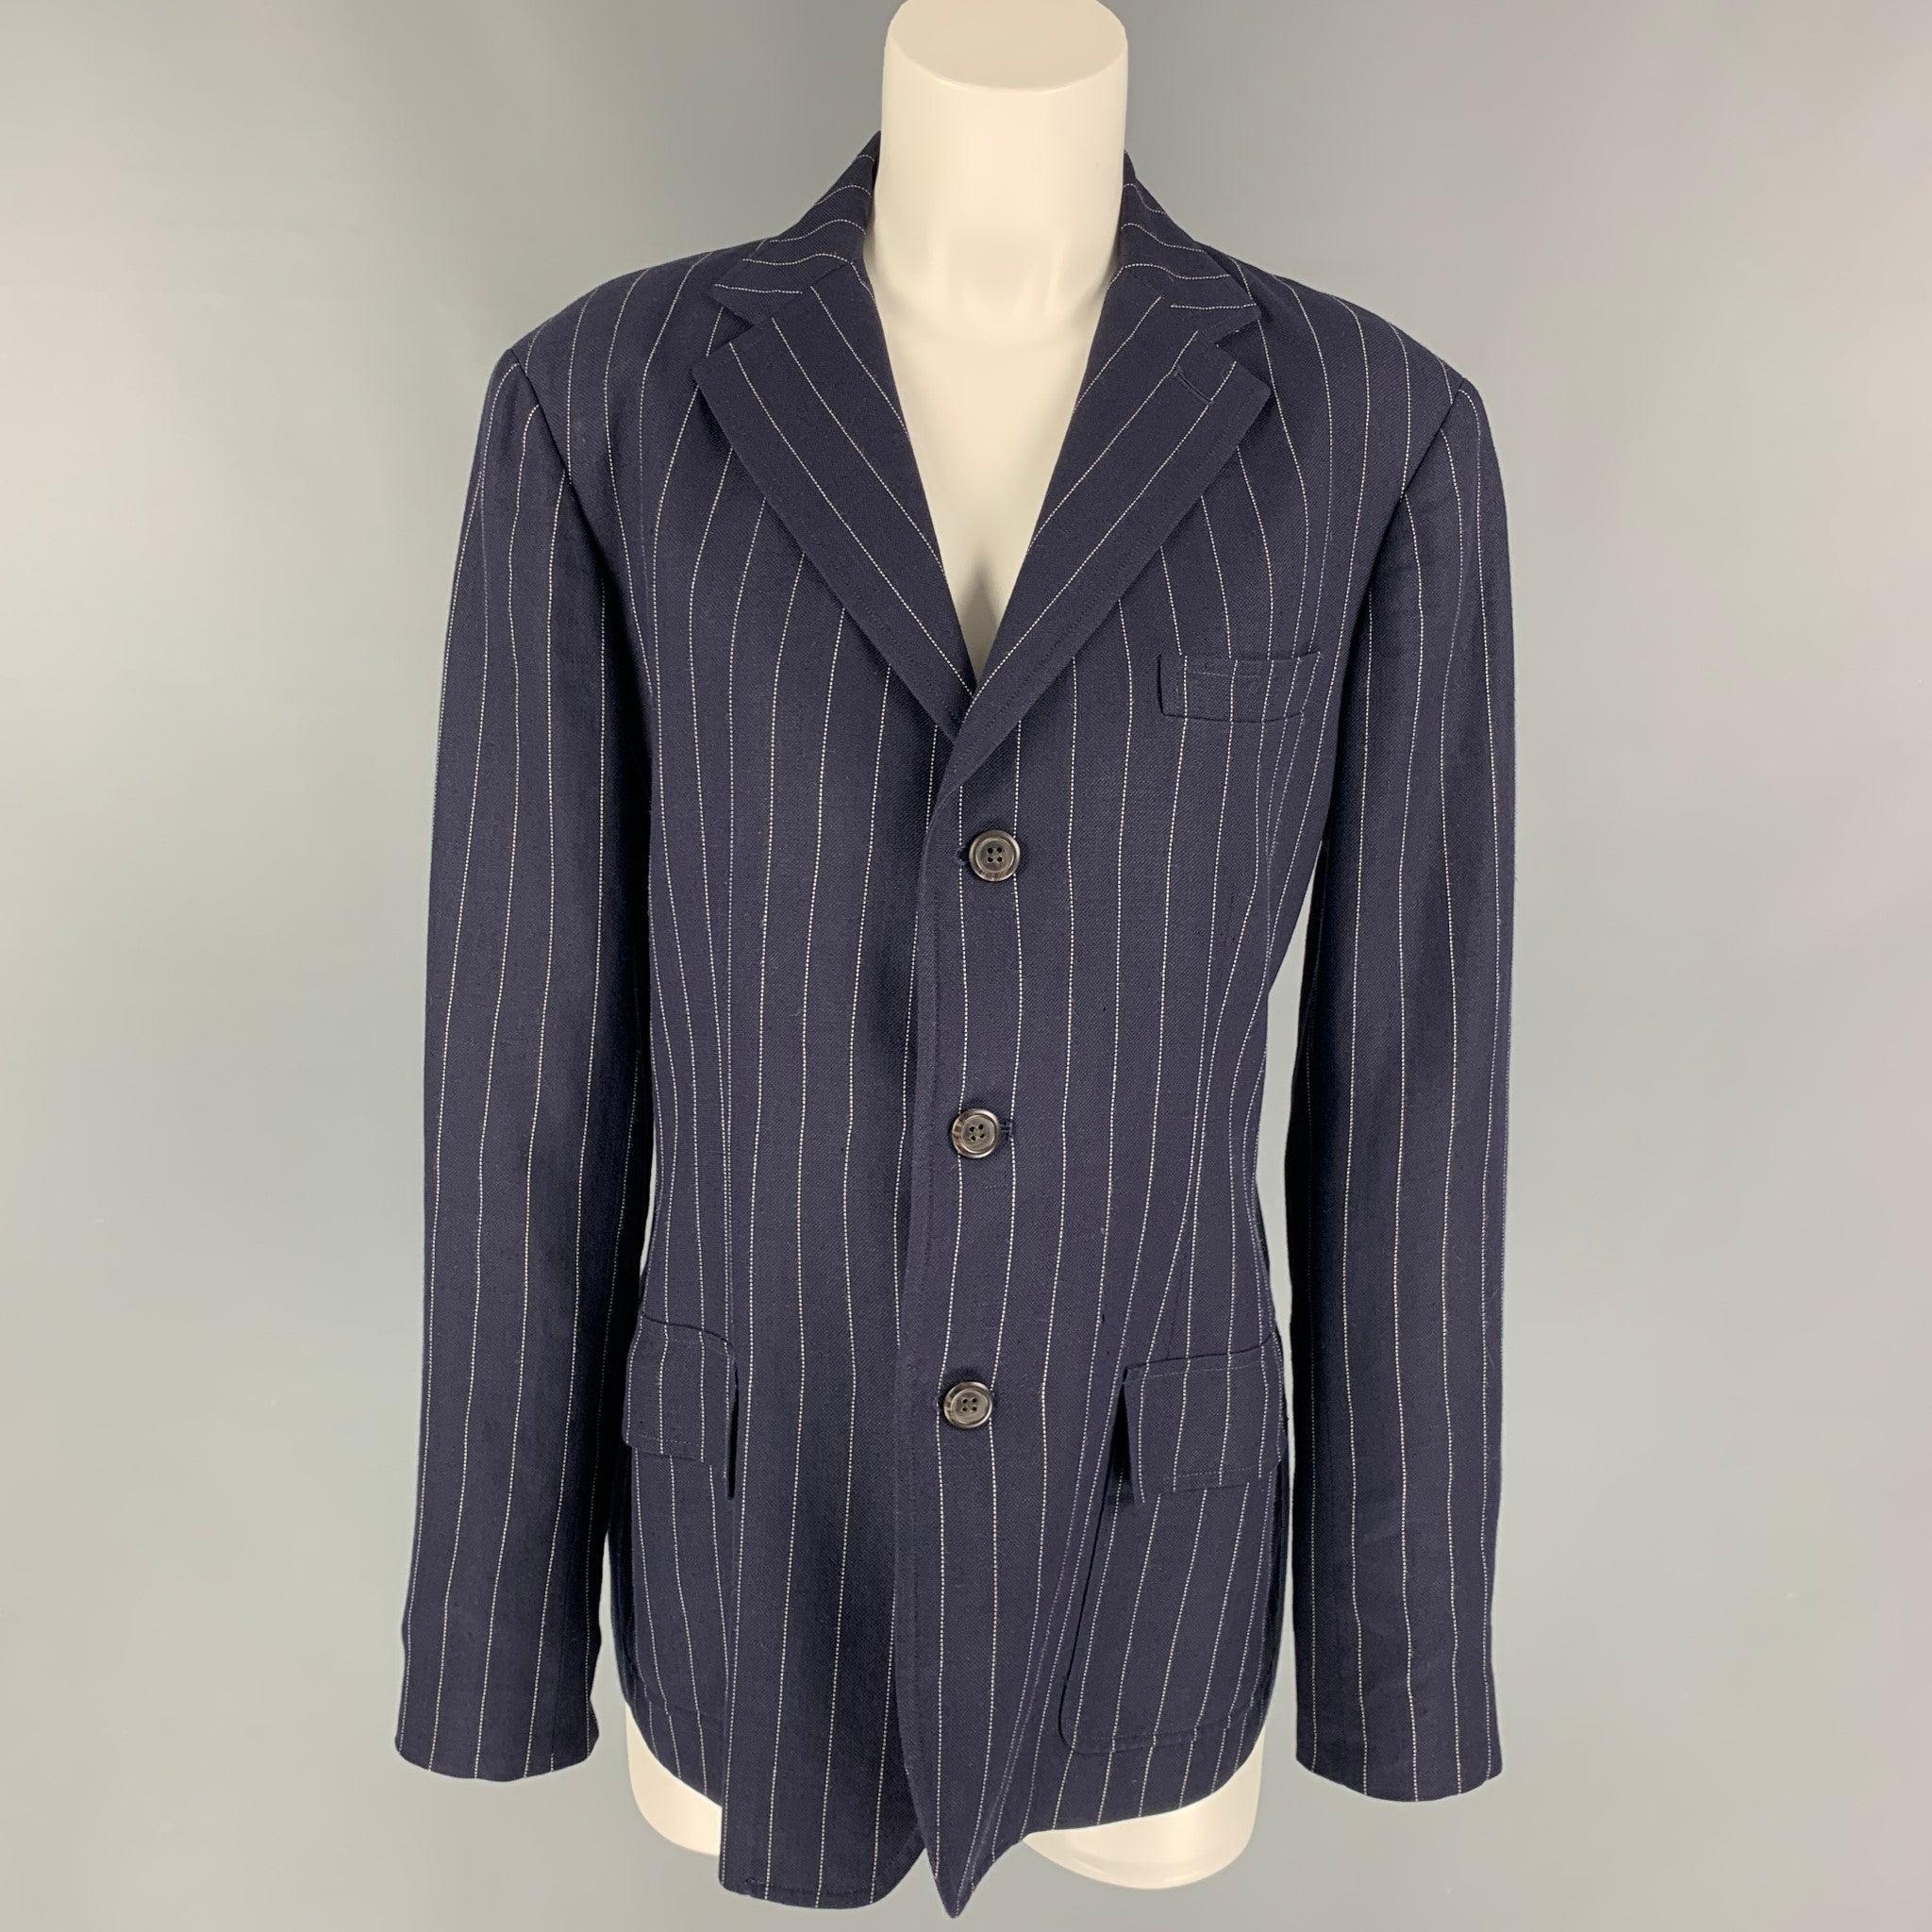 RALPH LAUREN 'Blue Label' blazer comes in a navy & white pinstripe linen blend with a full liner featuring a notch lapel, flap pockets, single back vent, and a three button closure. Matching pants sold separately. Made in Italy. Very Good
Pre-Owned